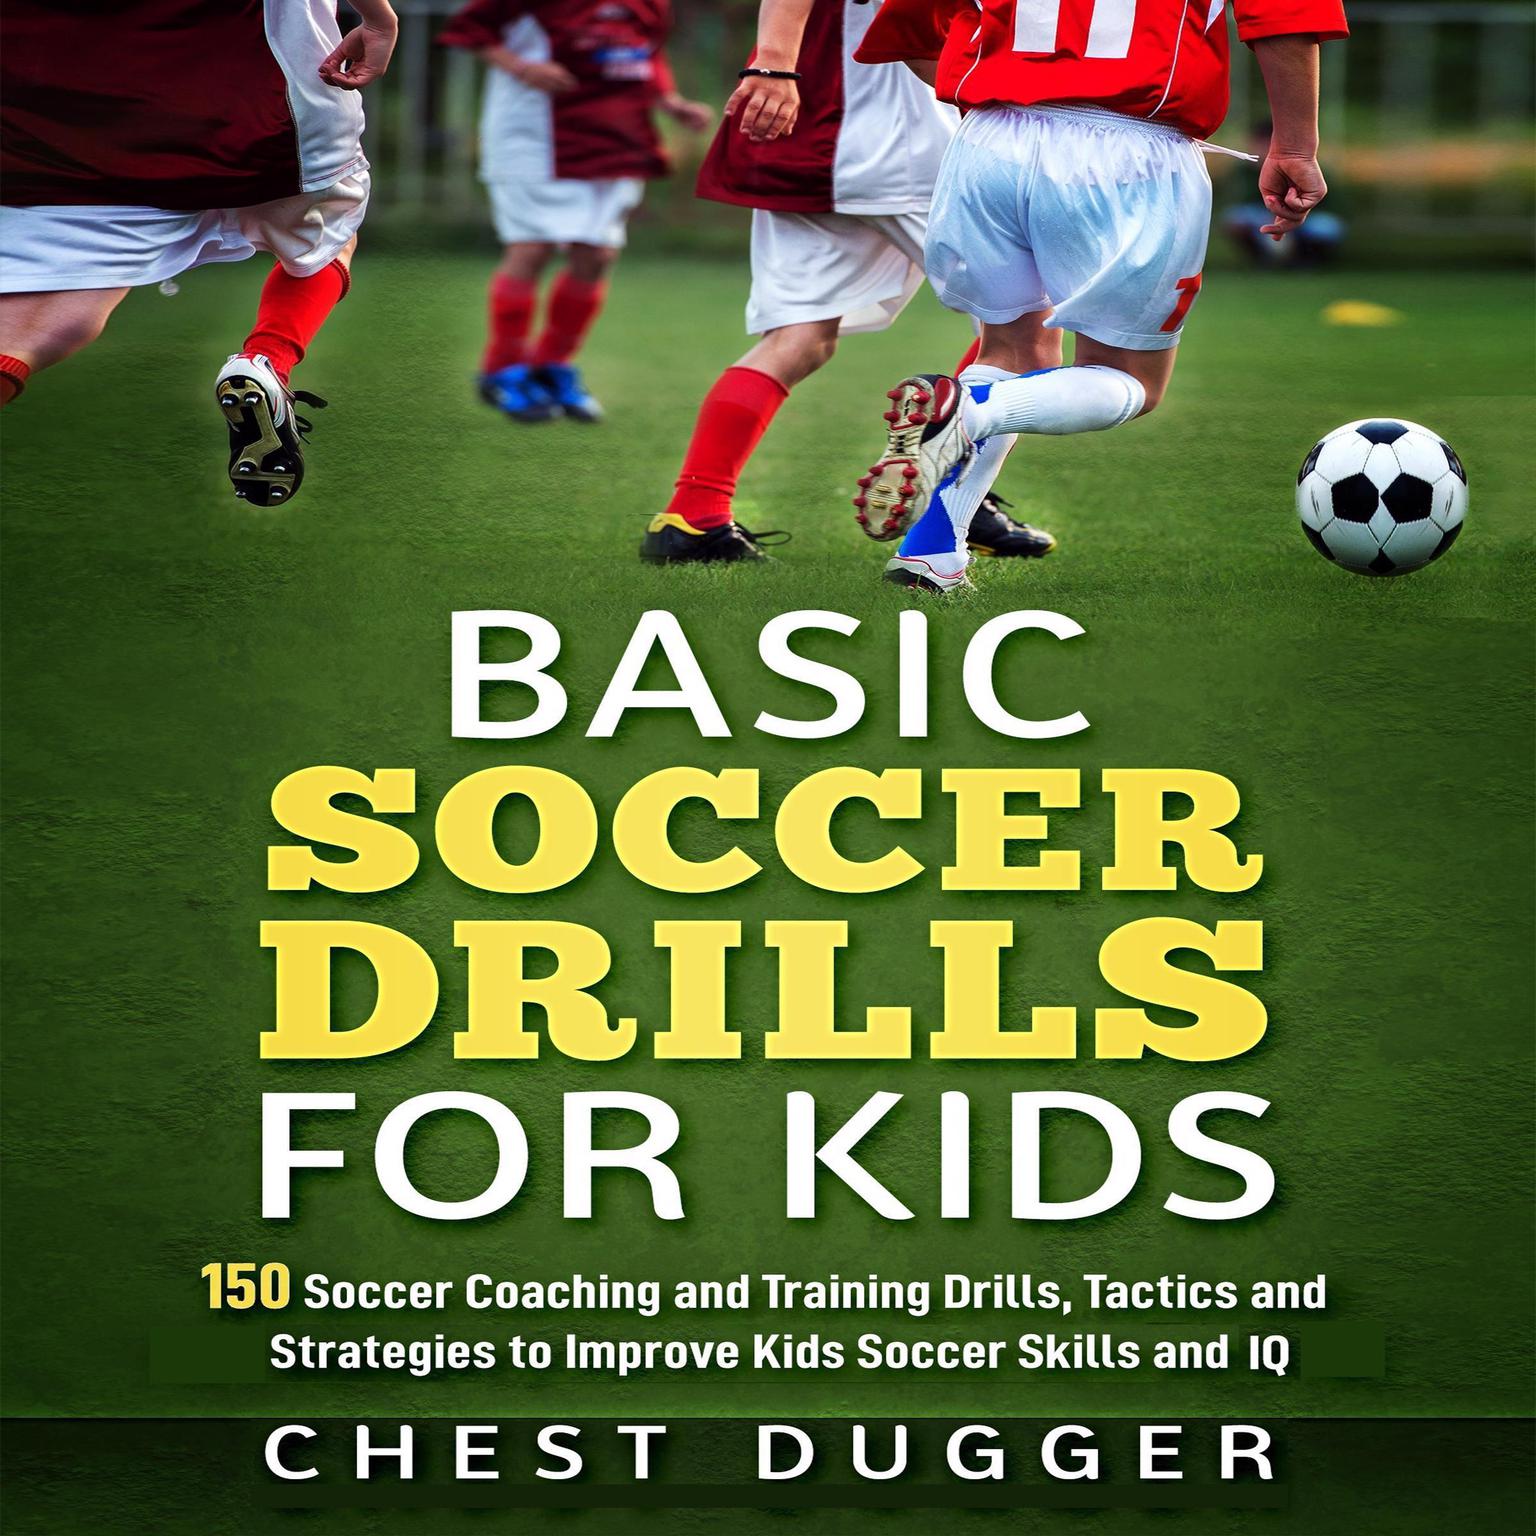 Basic Soccer Drills for Kids: 150 Soccer Coaching and Training Drills, Tactics and Strategies to Improve Kids Soccer Skills and IQ Audiobook, by Chest Dugger